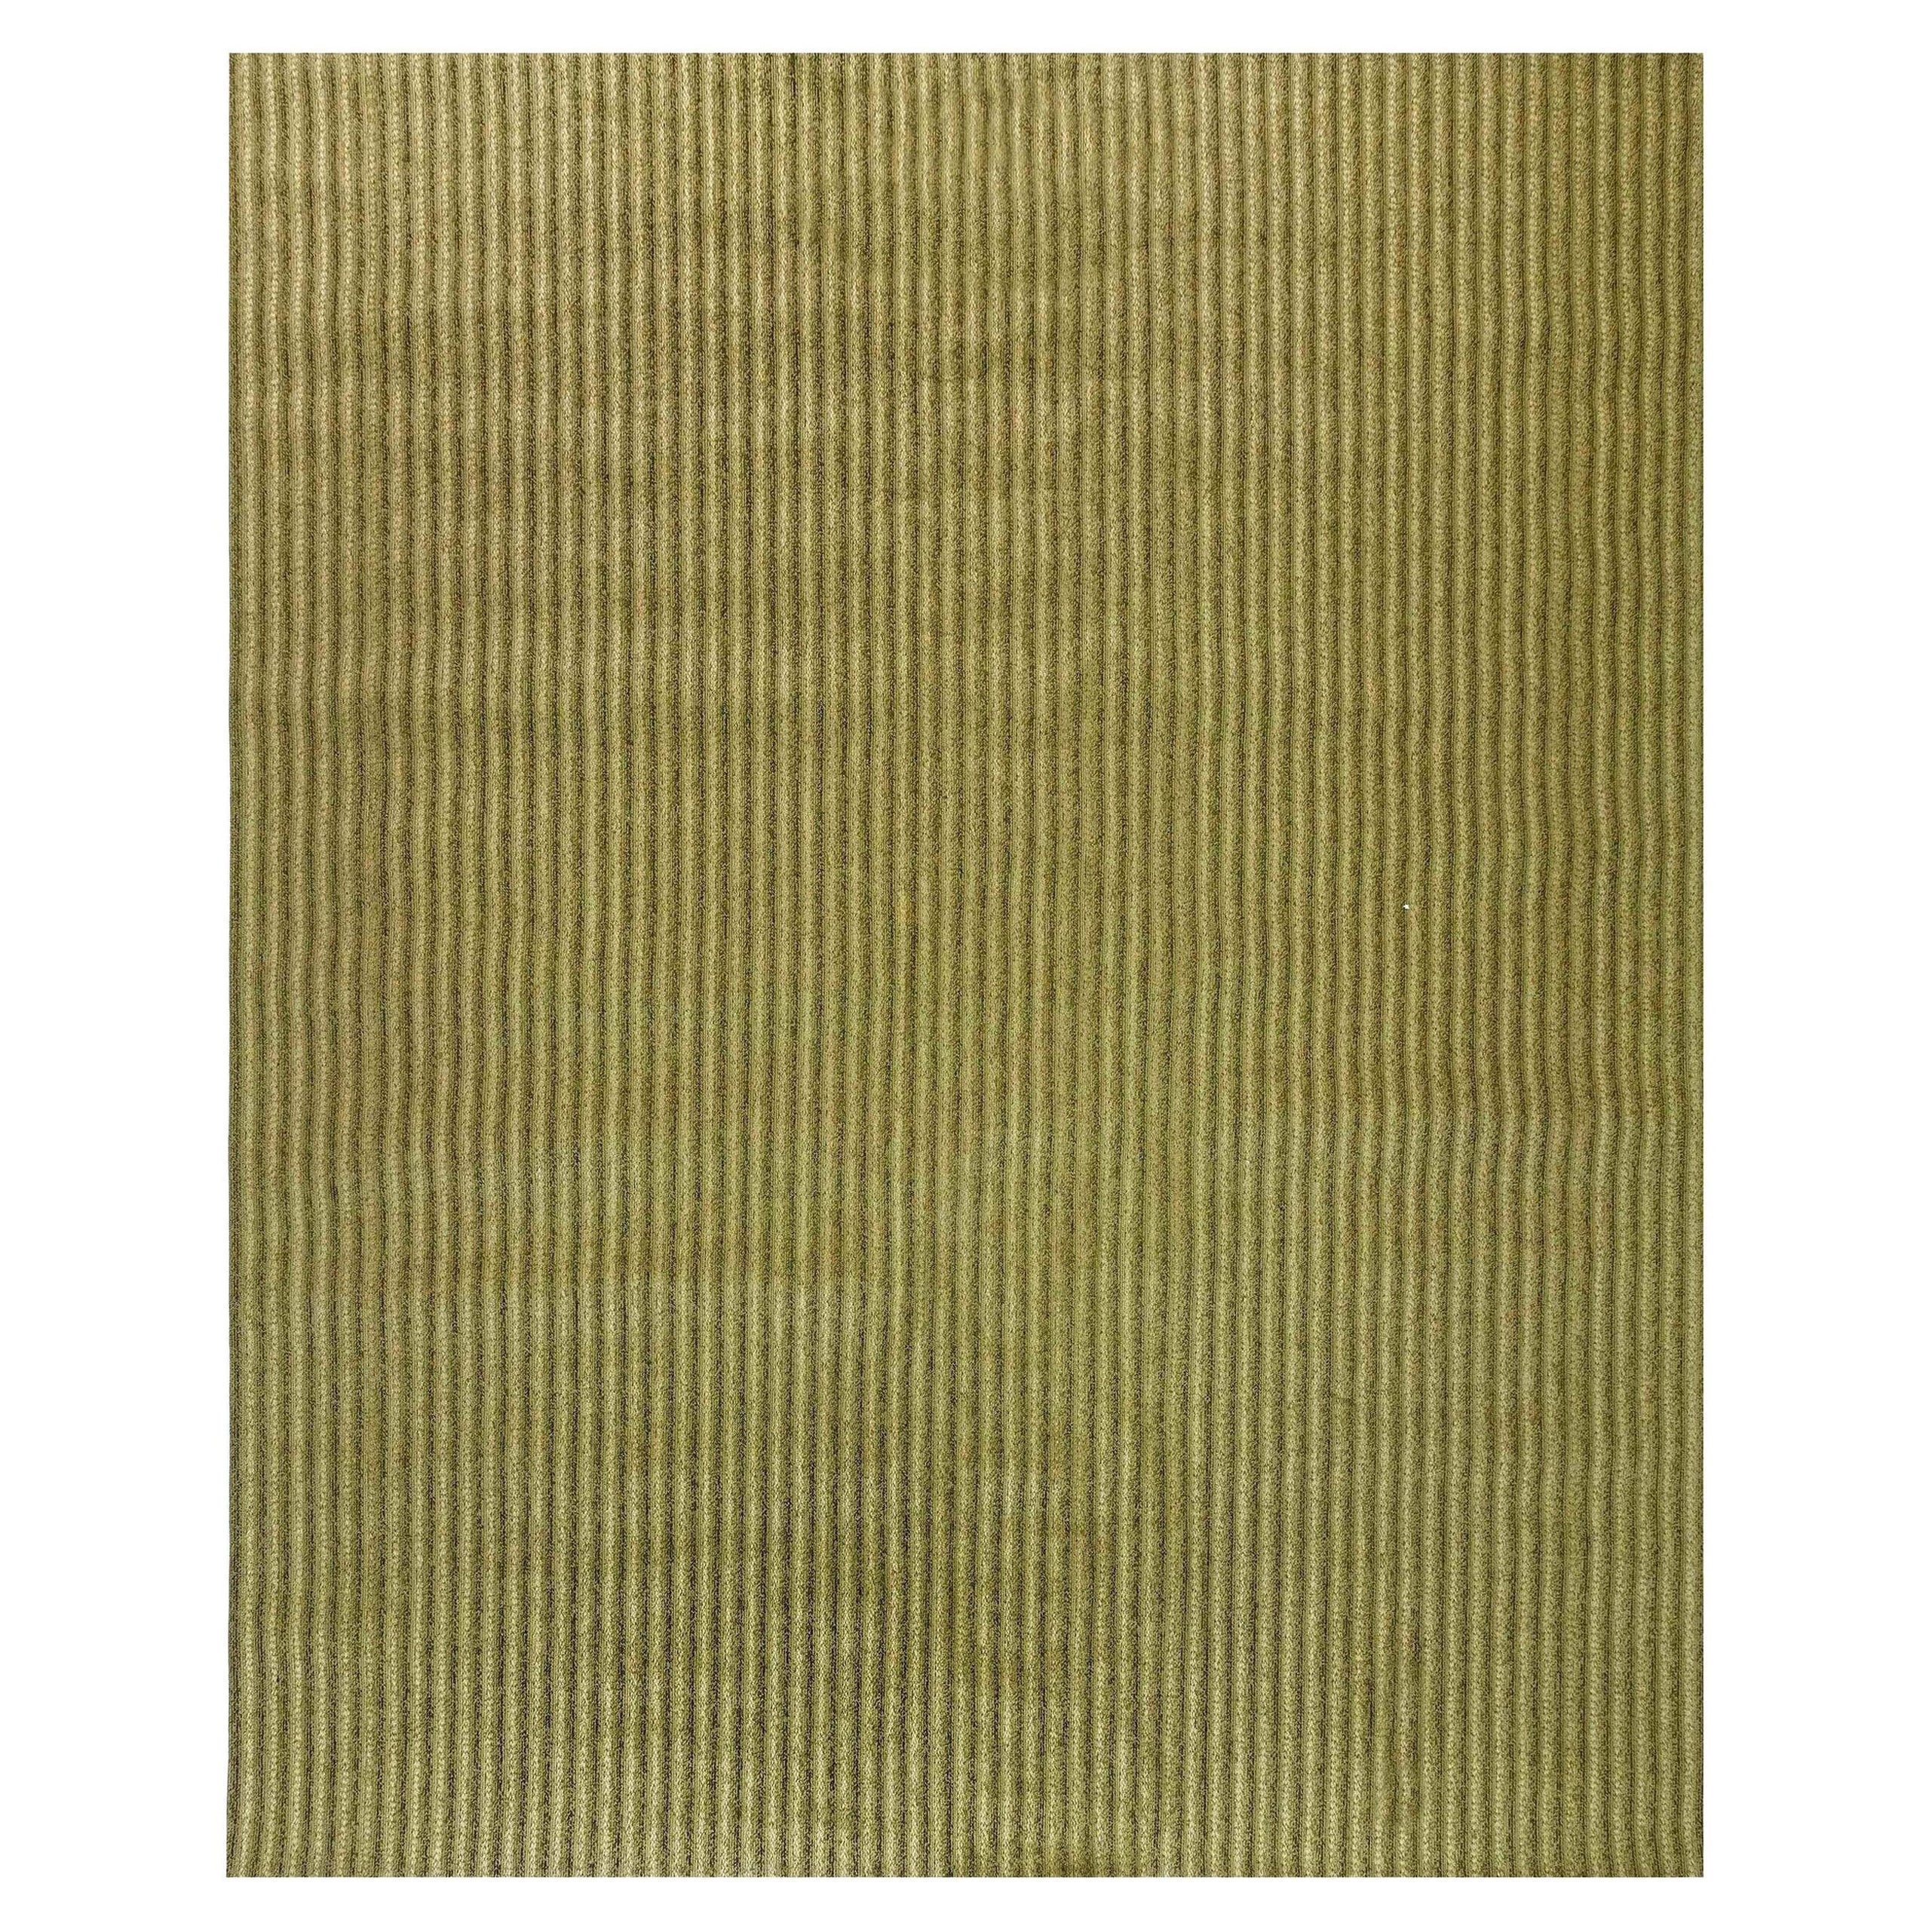 Contemporary Striped Twisted Belts Leather Rug by Doris Leslie Blau For Sale